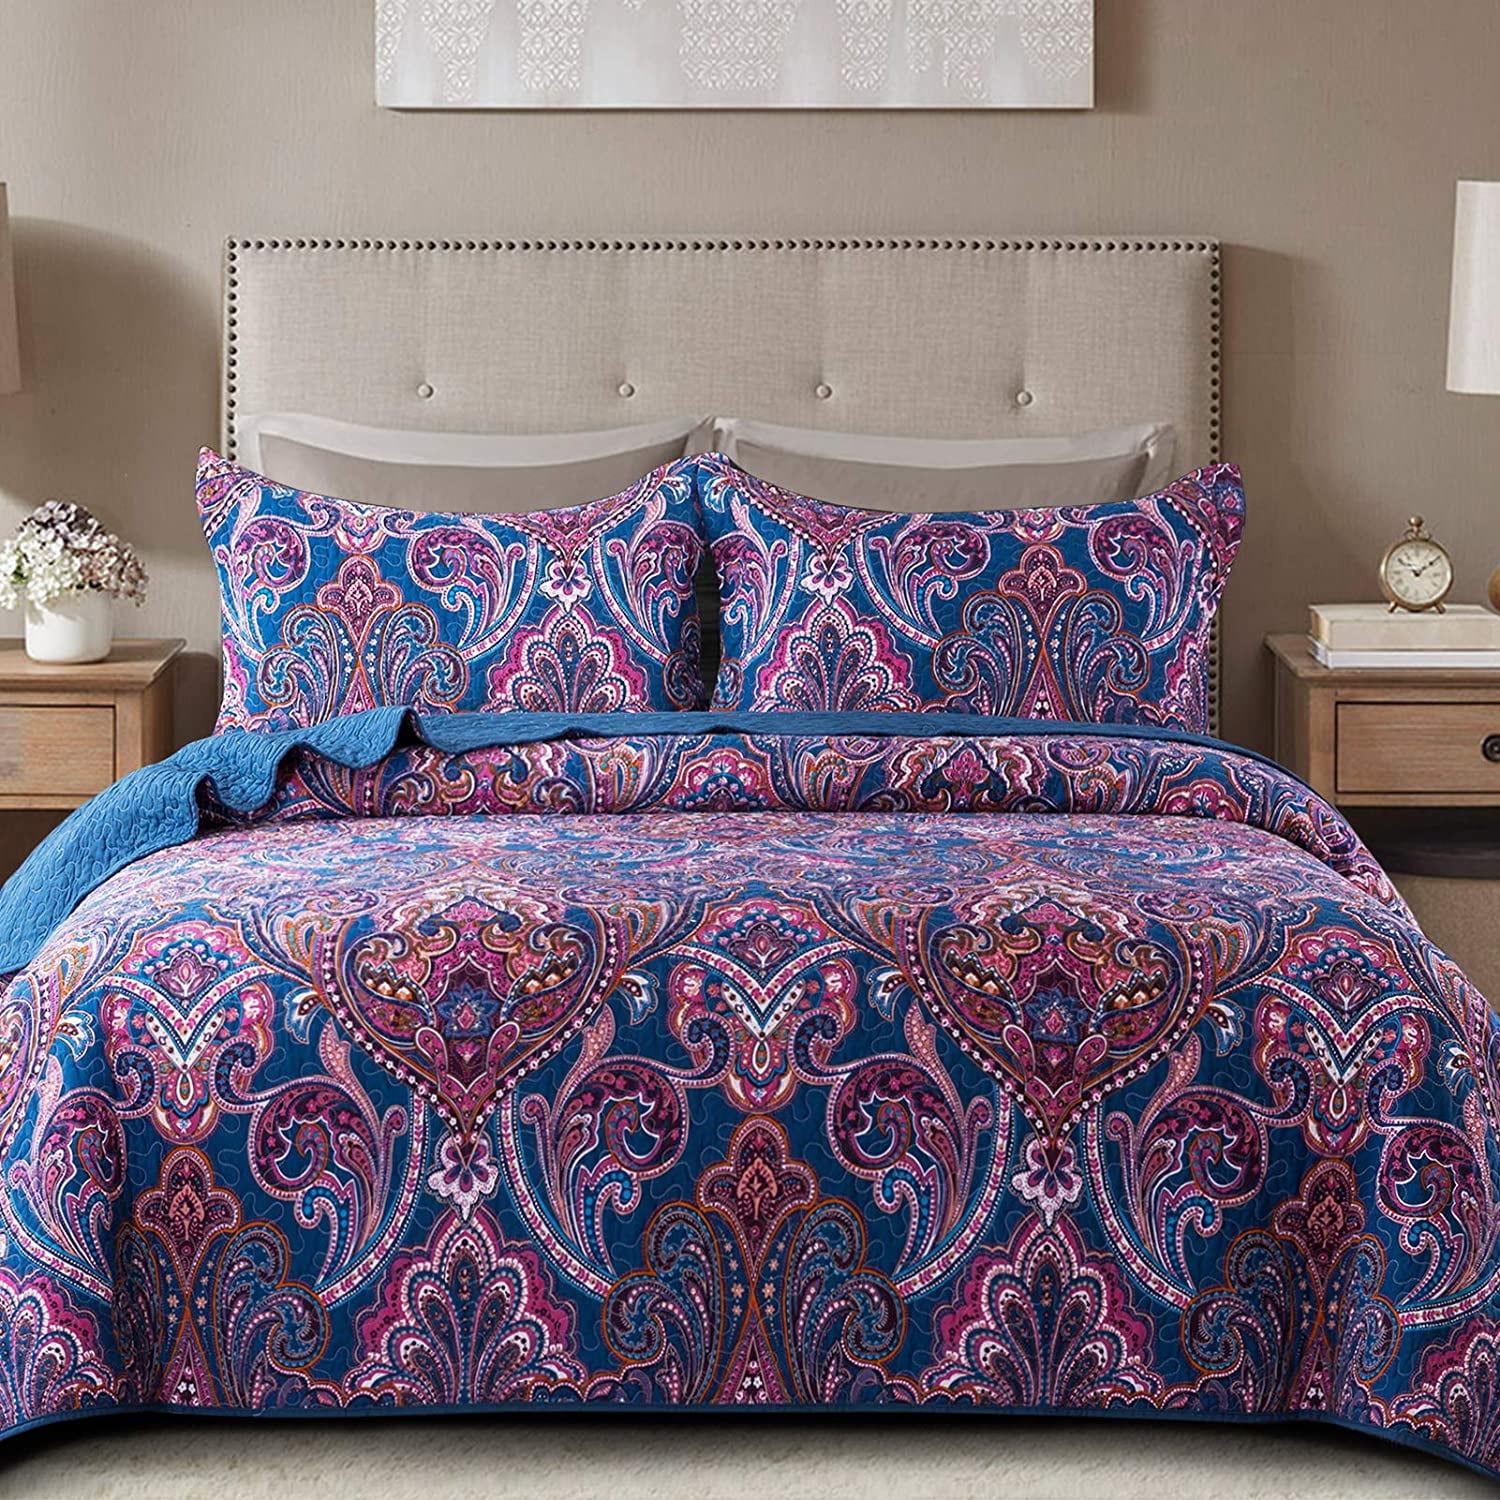 NEWLAKE Quilt Bedspread Sets-Paisley Floral Pattern Reversible Coverlet Set,Queen Size